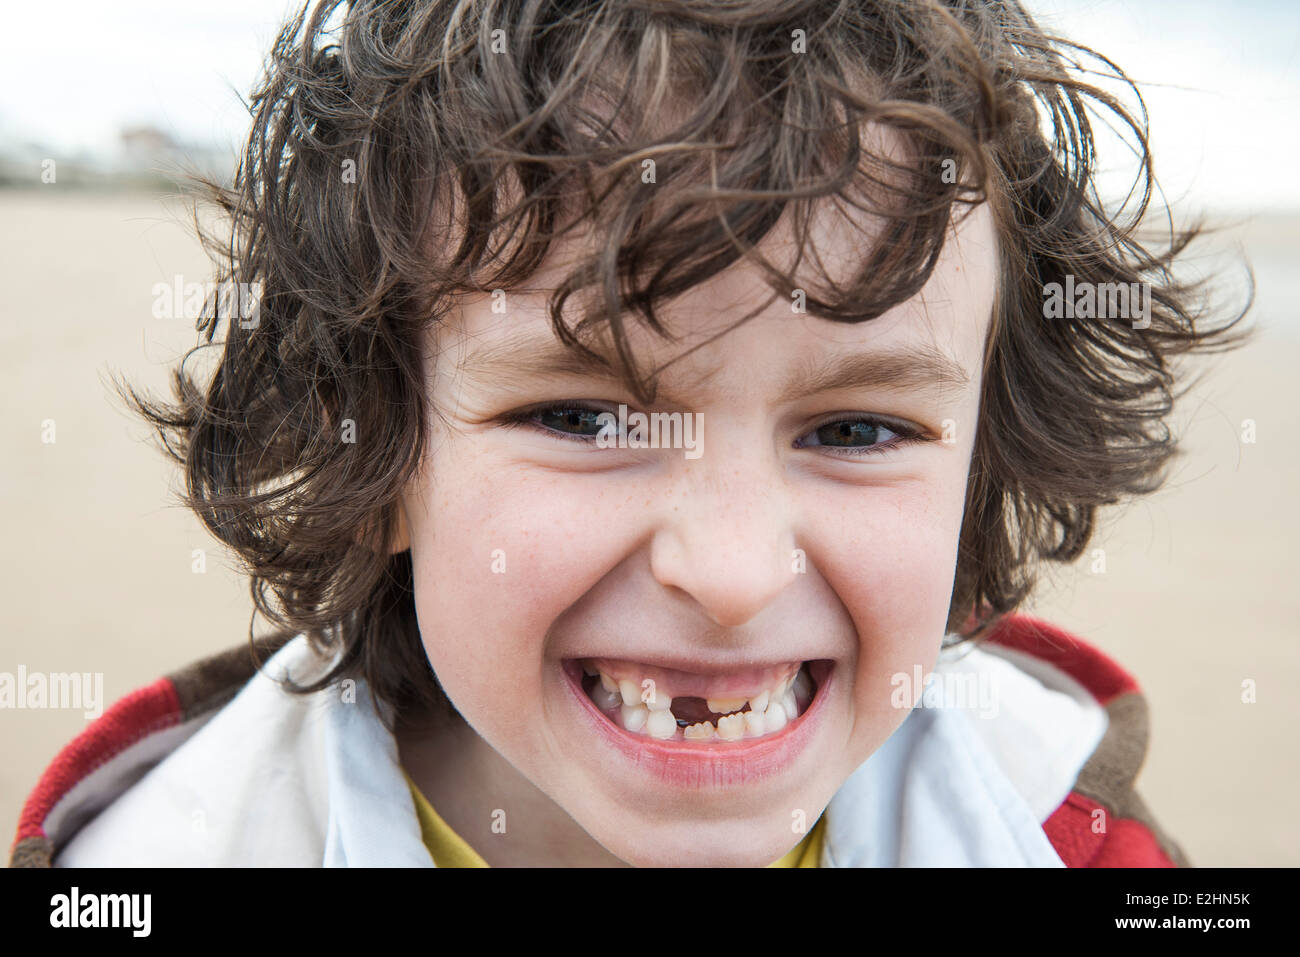 Boy showing off missing tooth, portrait Stock Photo